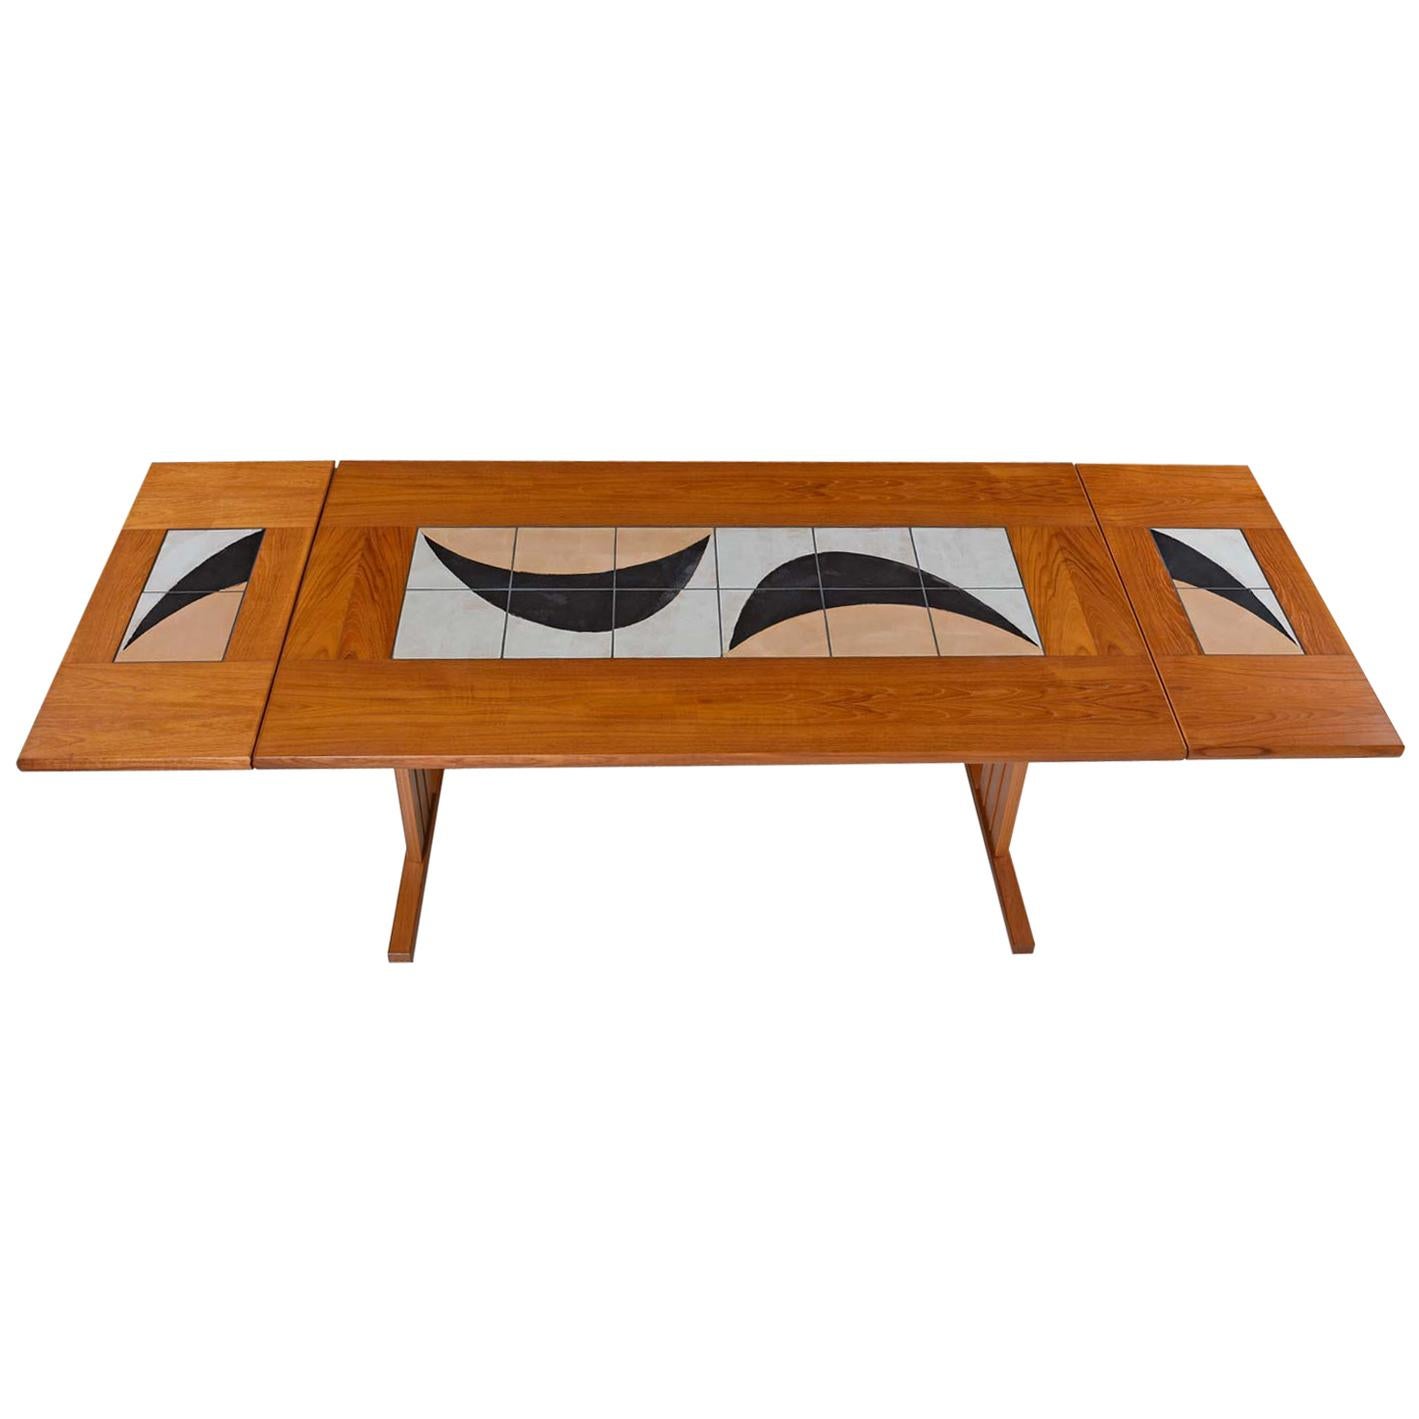 1980s Modern Danish Teak Decorative Stone Top Dining Table Signed by the Artist